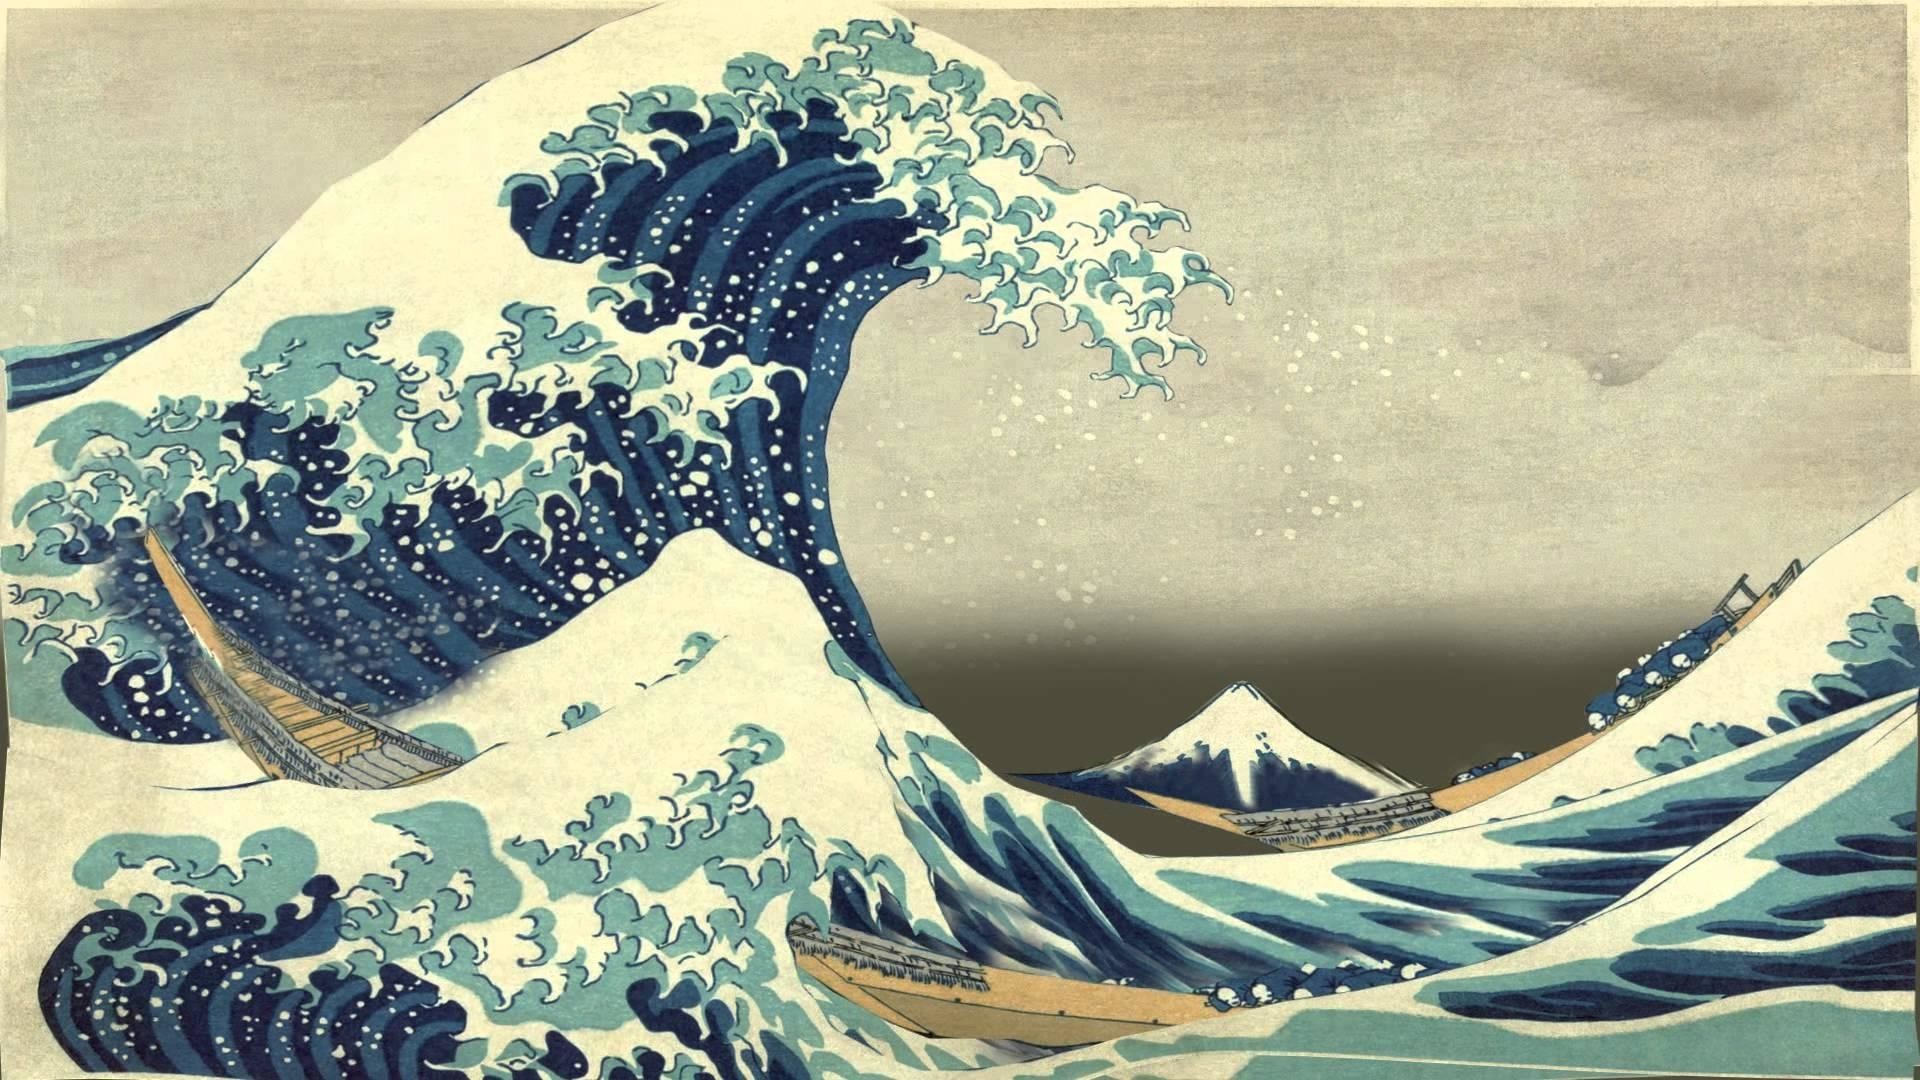 The Great Wave Wallpaper.